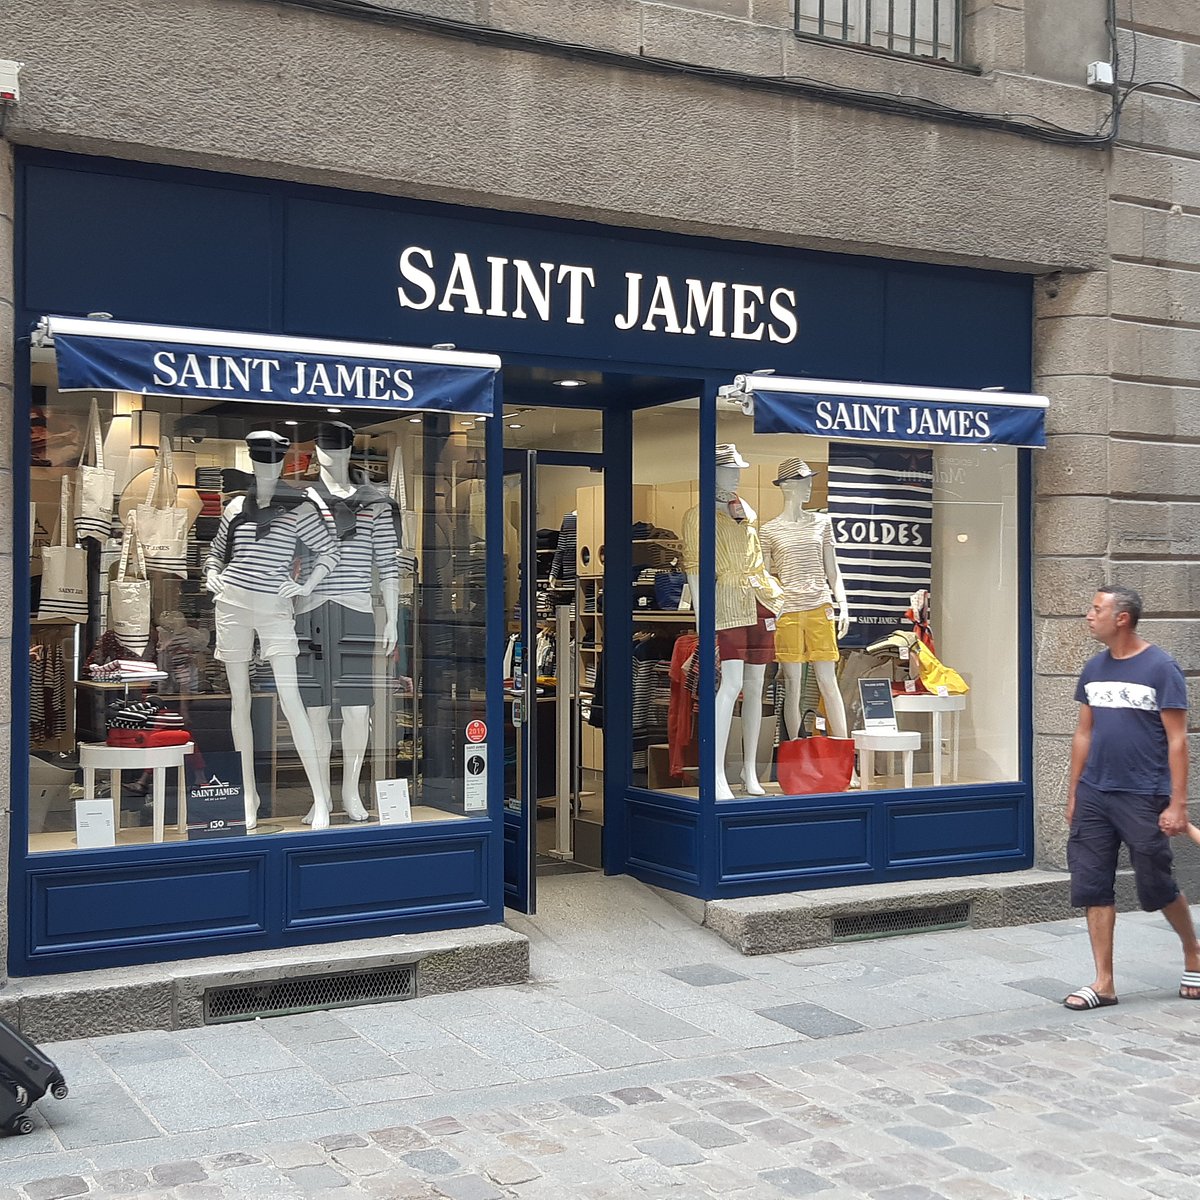 saint james - All You Need to Know BEFORE You Go (with Photos)